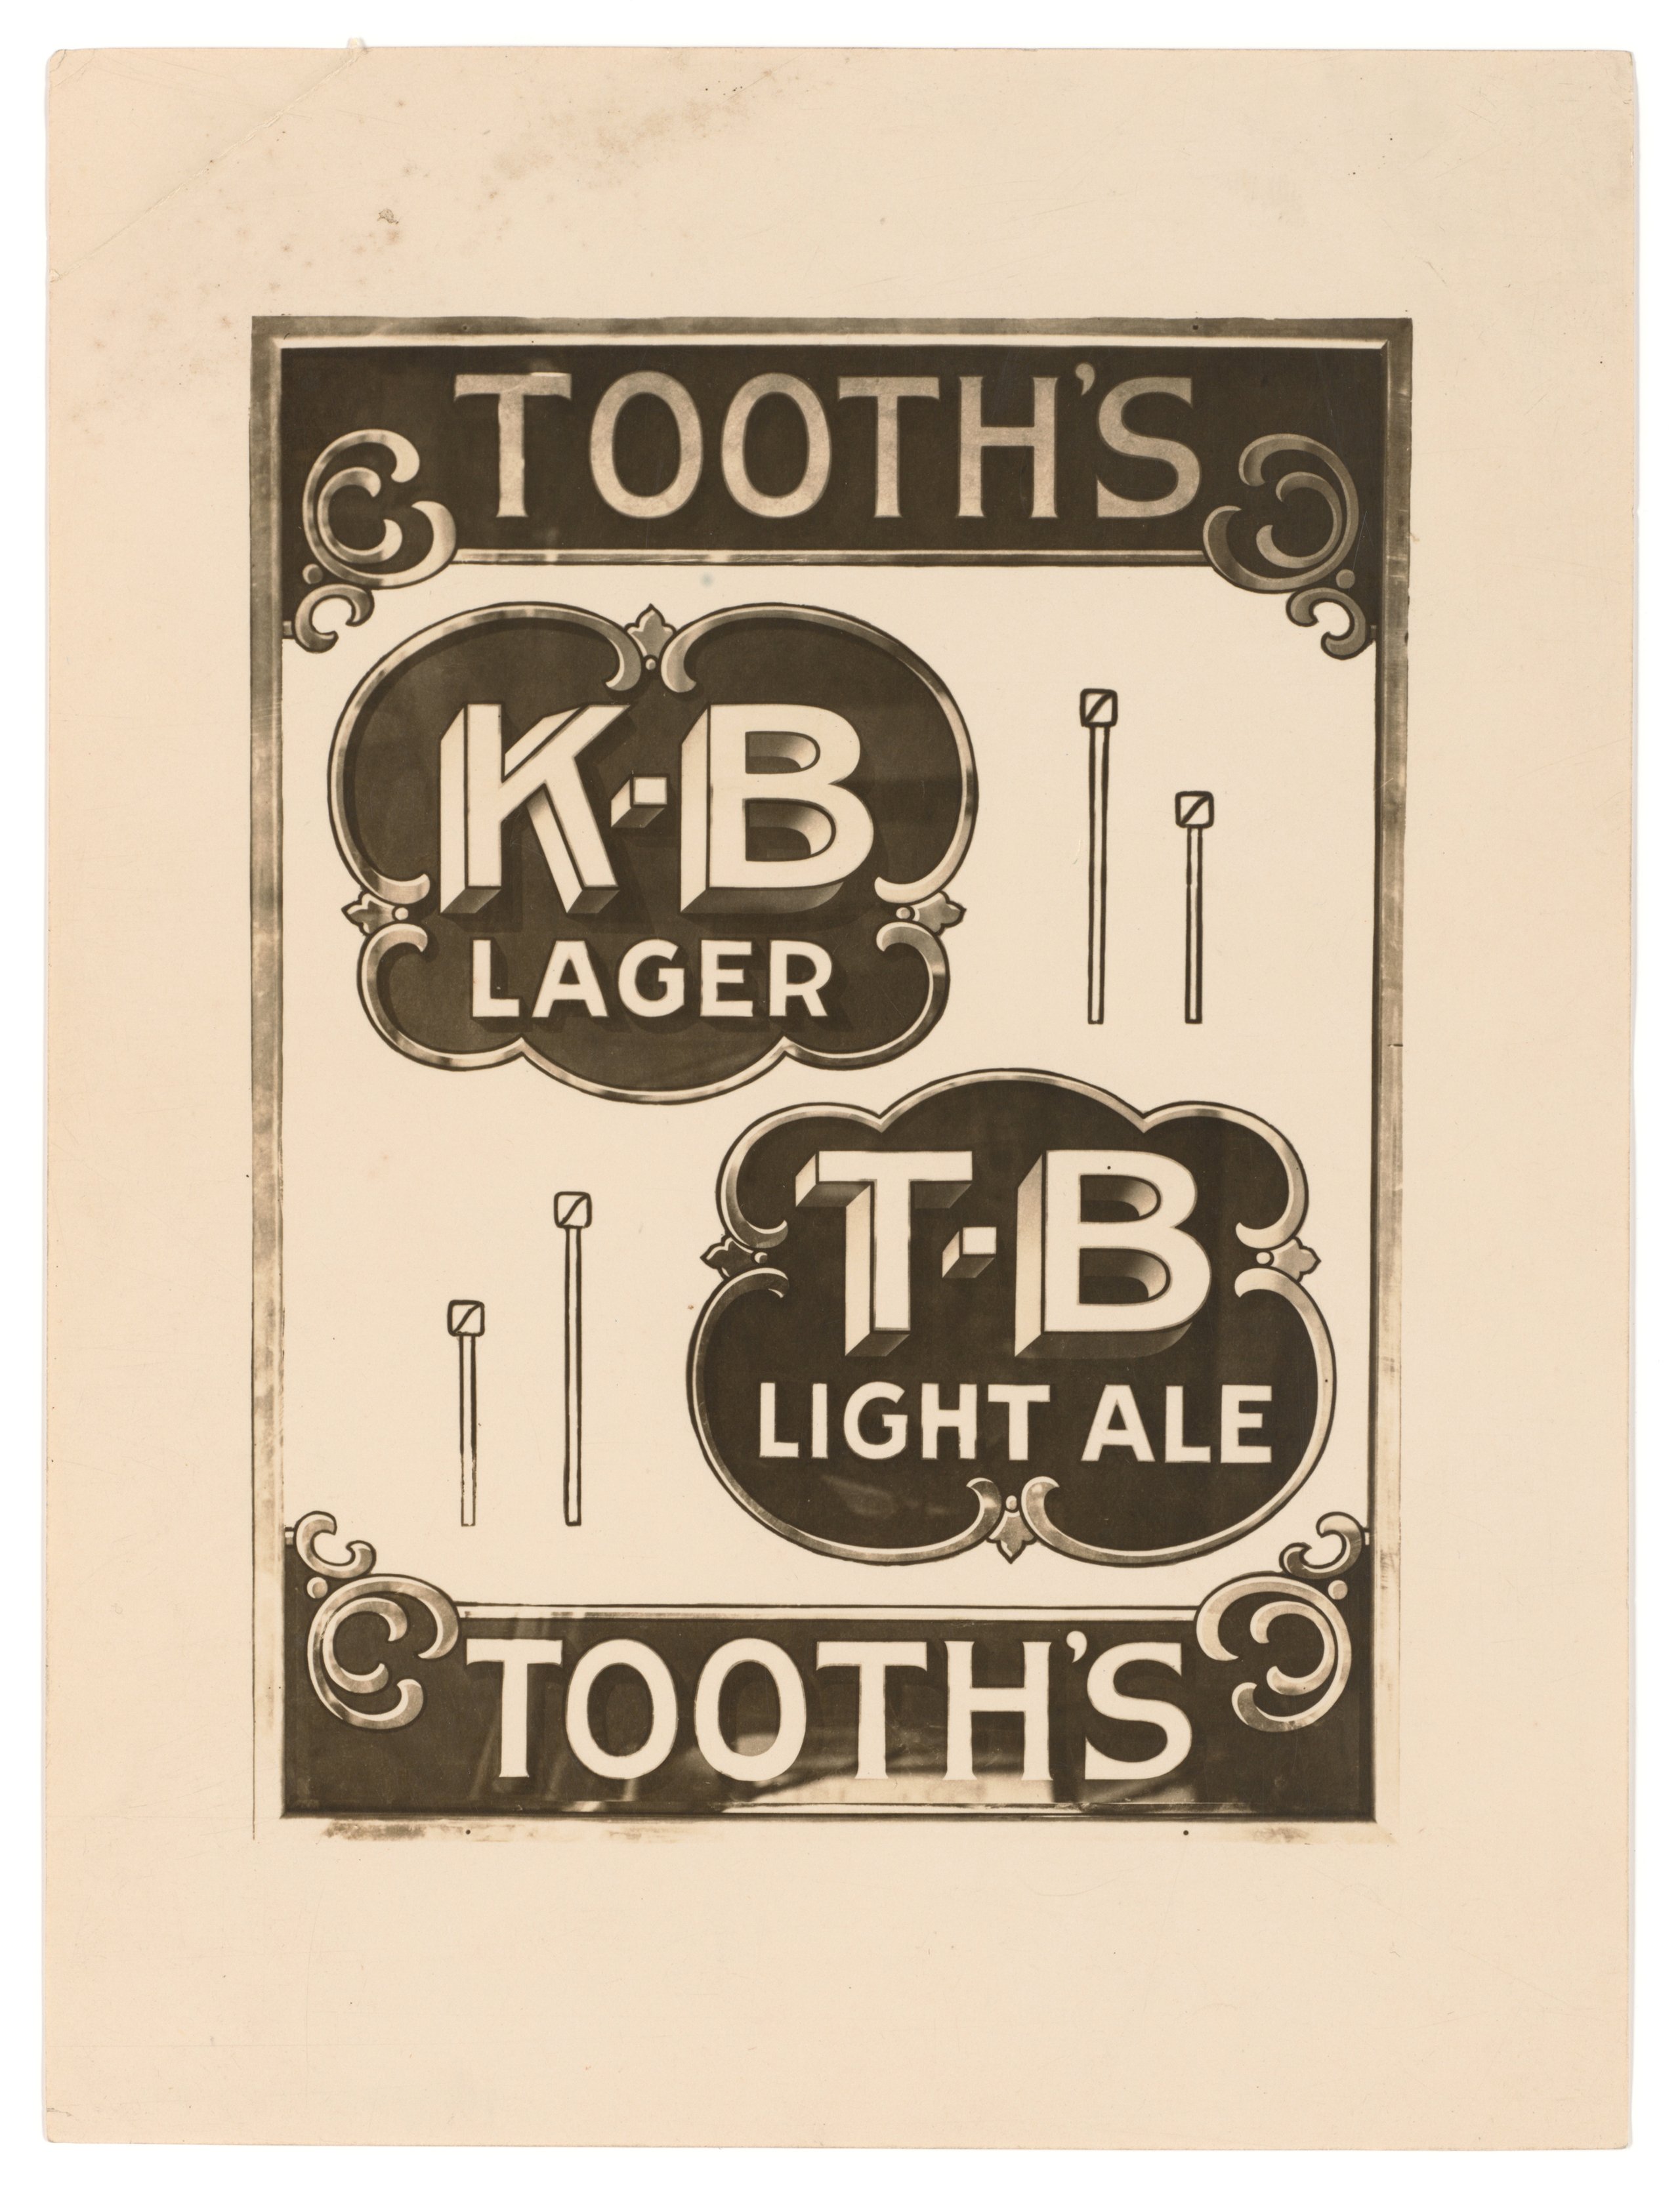 Photograph of glass pub sign advertising Tooth's K B Lager and T B Light Ale